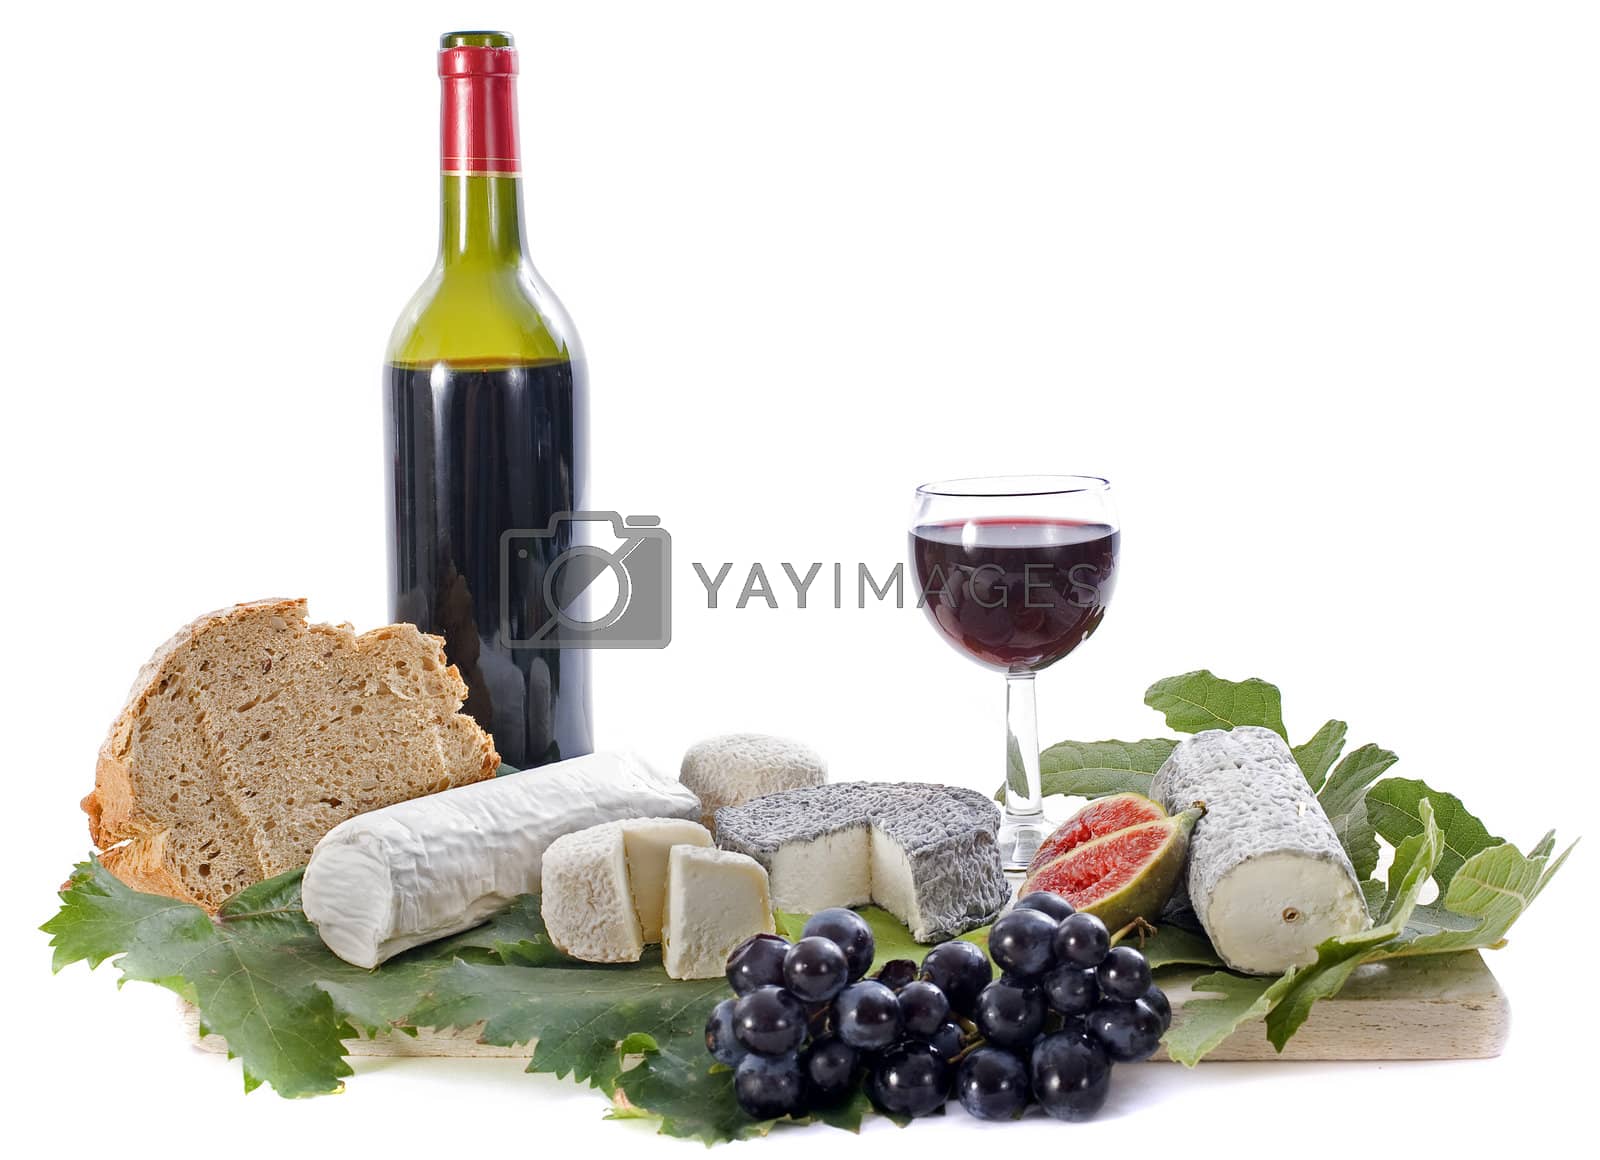 Royalty free image of goat cheeses, fruits and wine by cynoclub